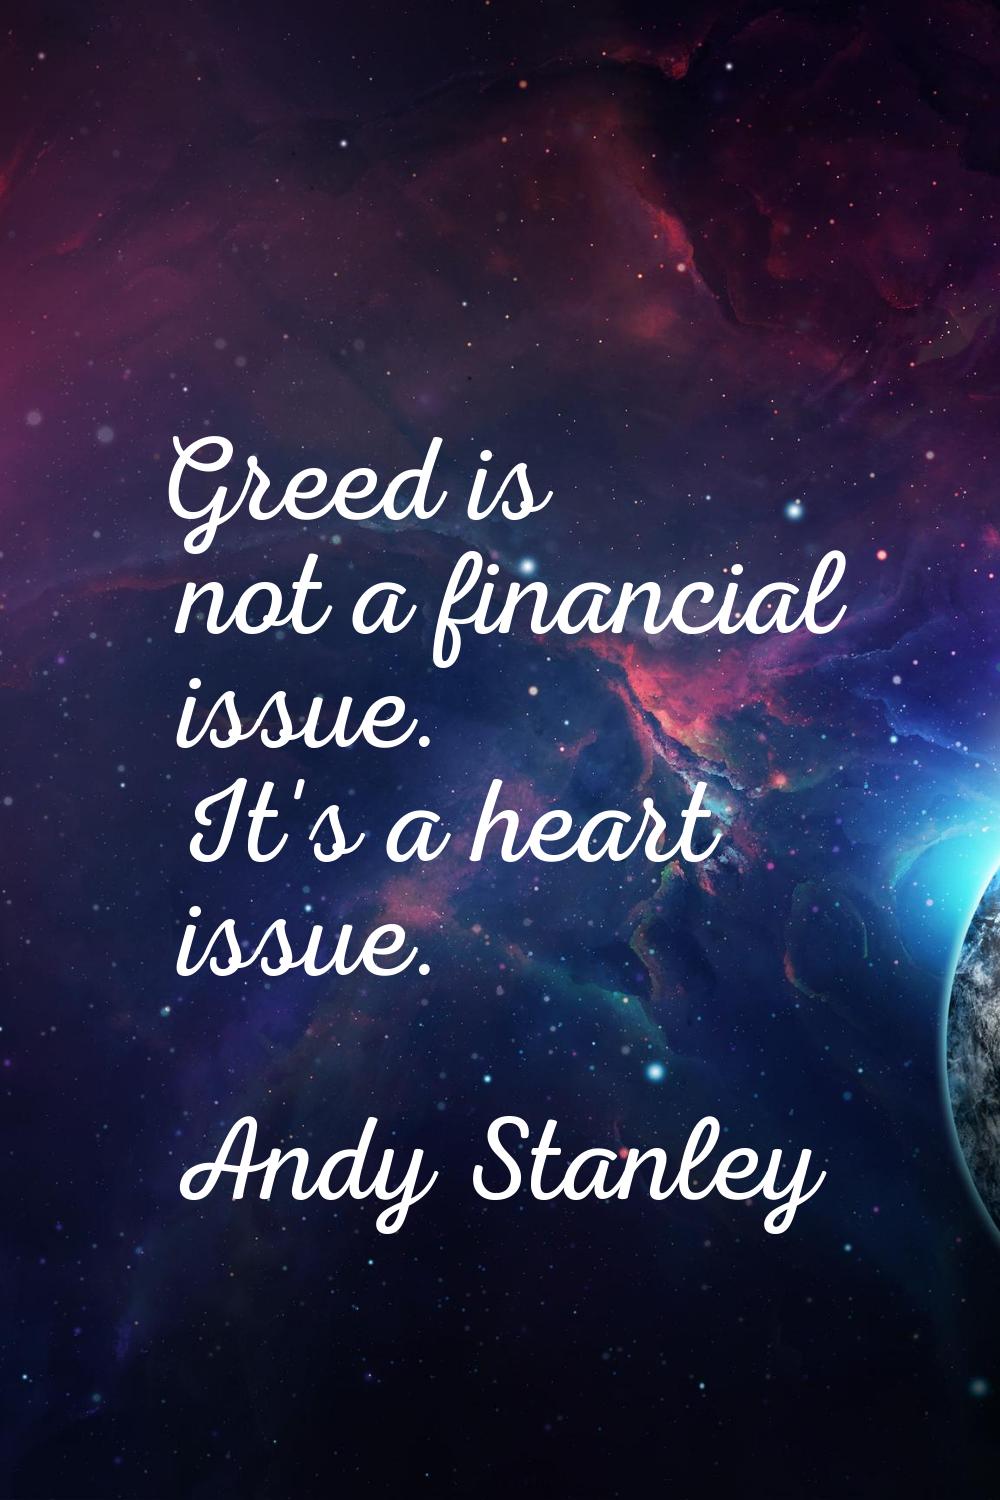 Greed is not a financial issue. It's a heart issue.